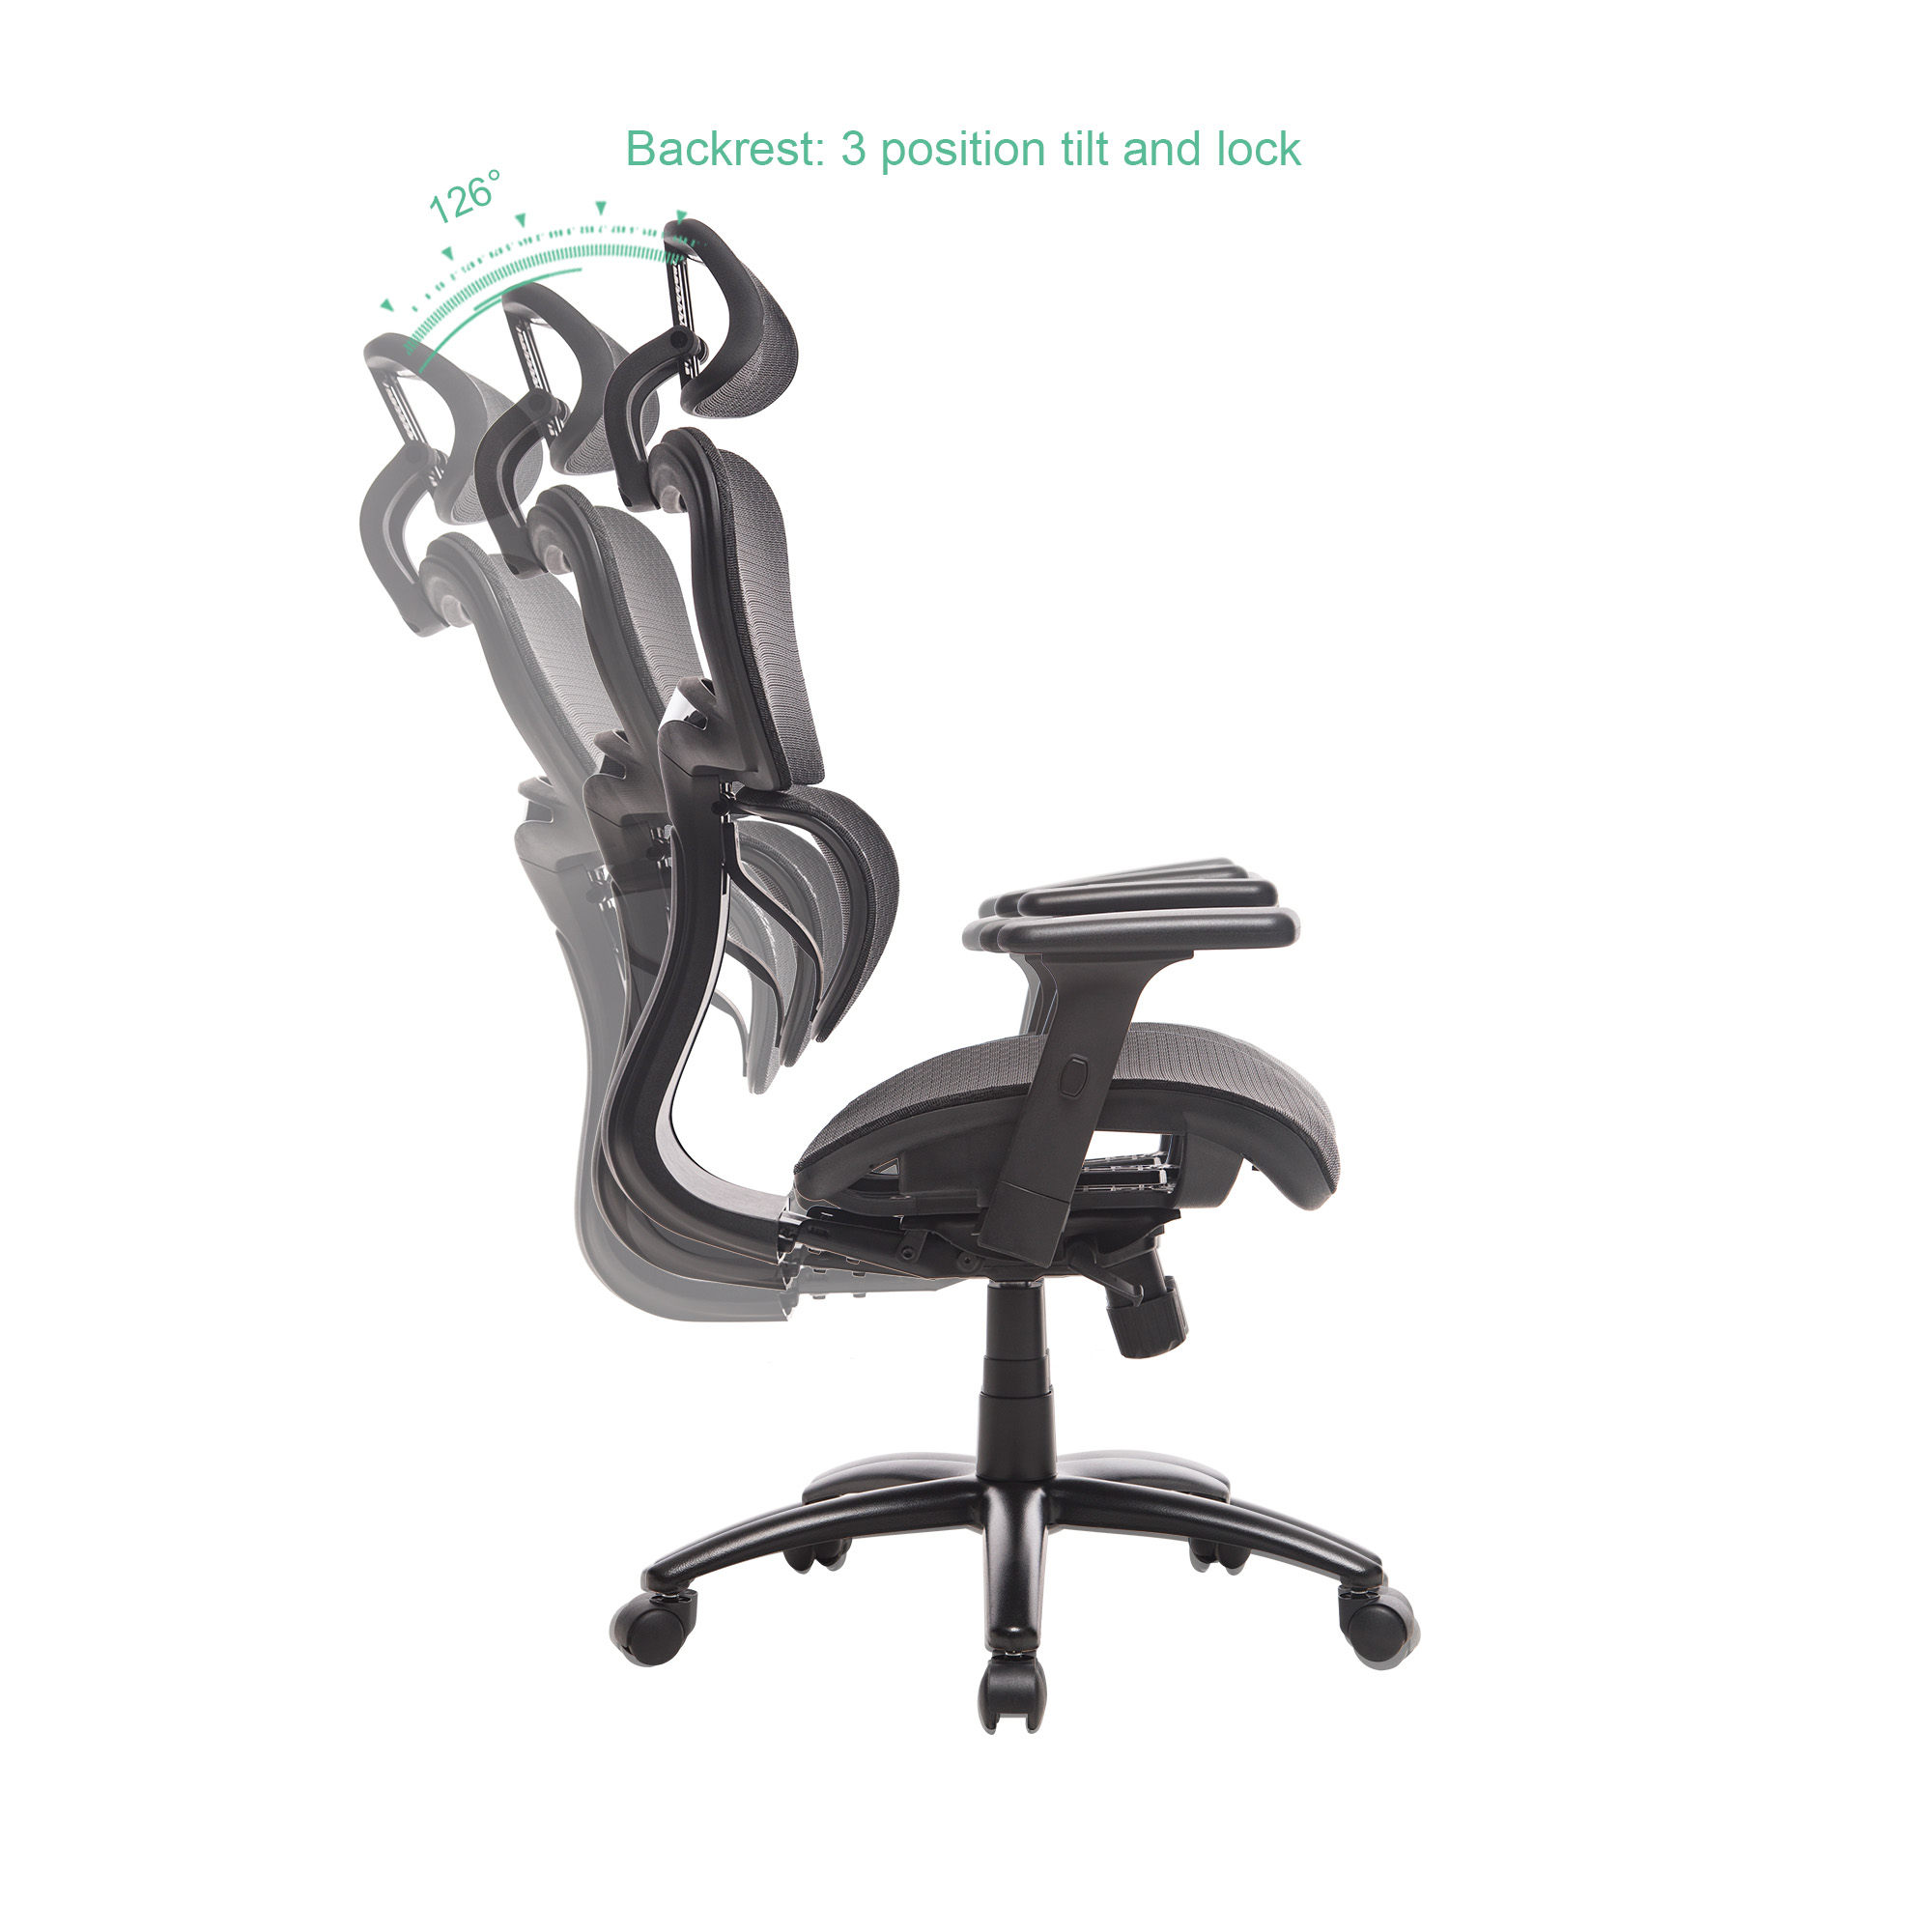 Ergonomic Office Chair Mesh Chair Computer Chair Desk Chair High Back Chair with Adjustable Headrest and Armrest-Black